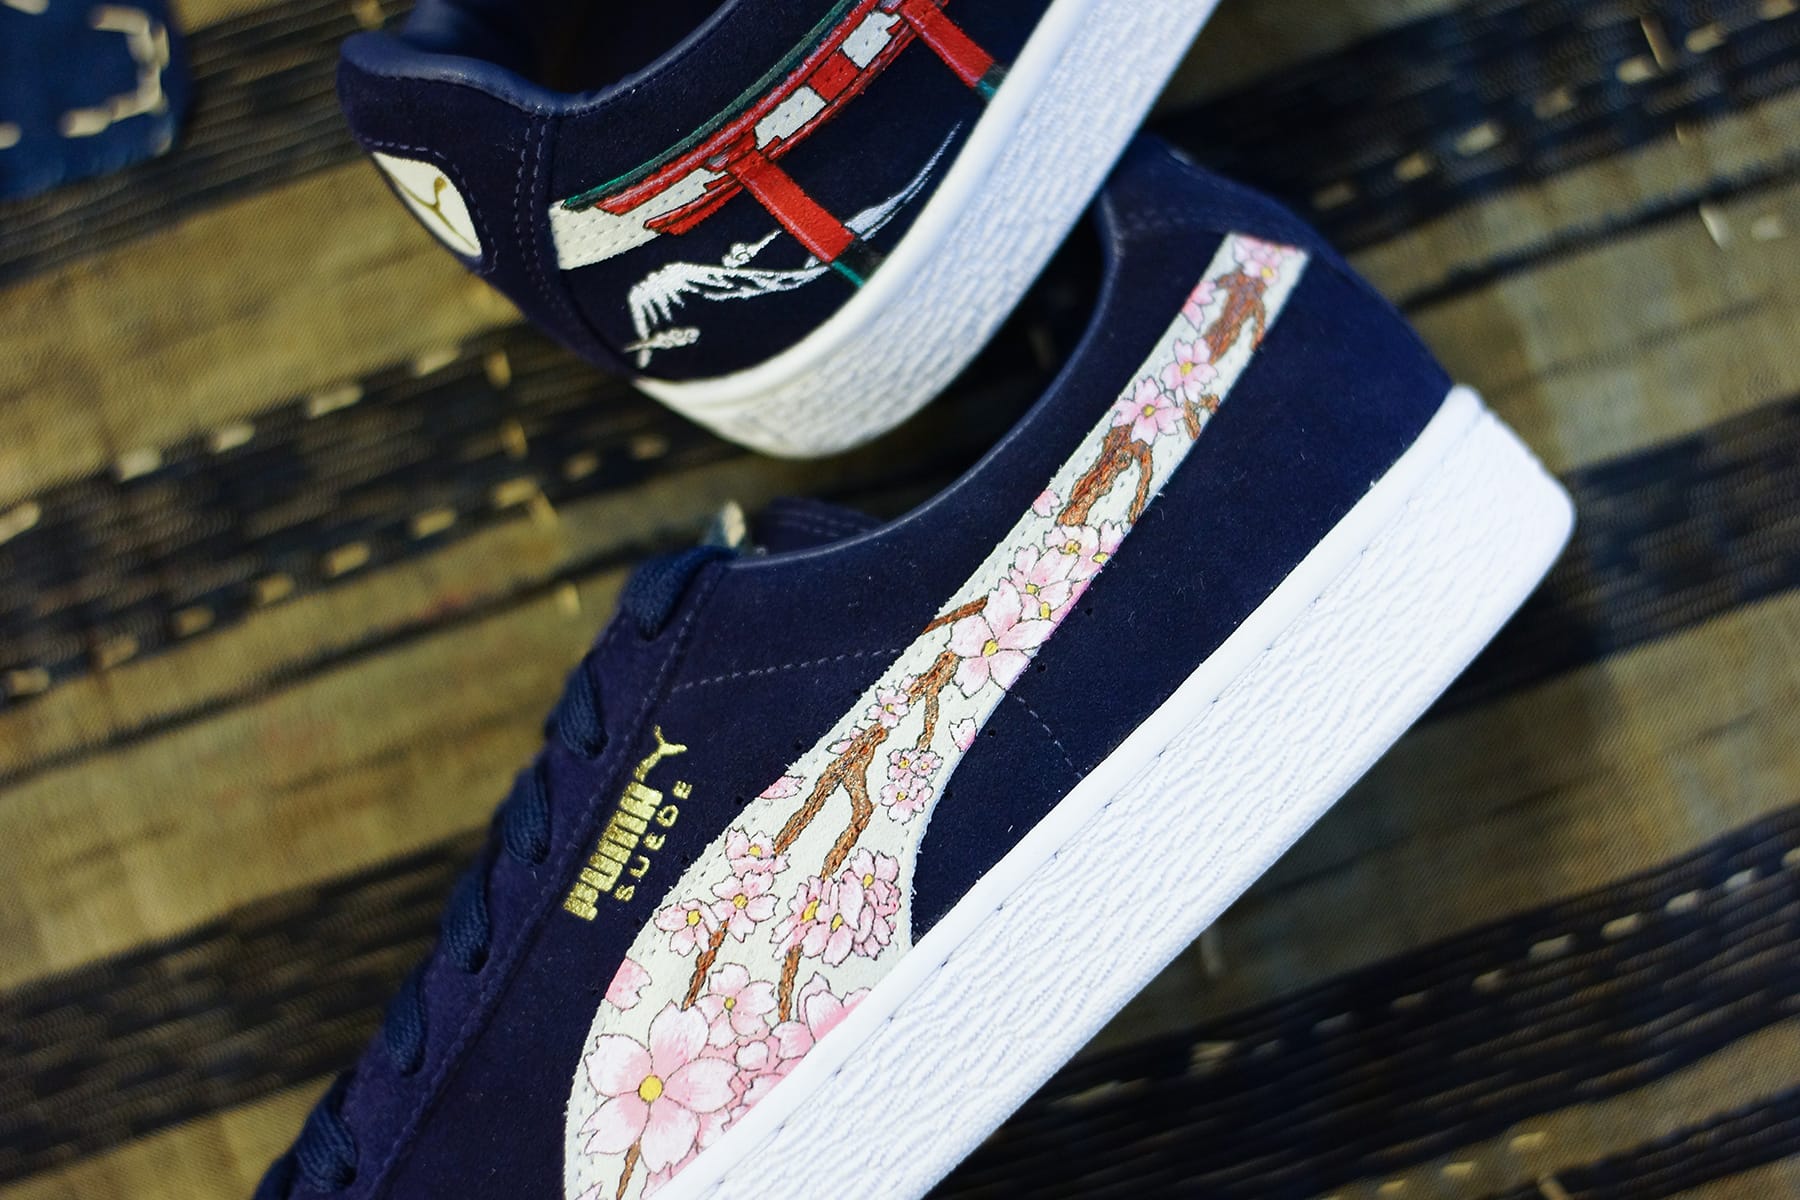 The PUMA Suede Sees a Traditional Ukiyo 